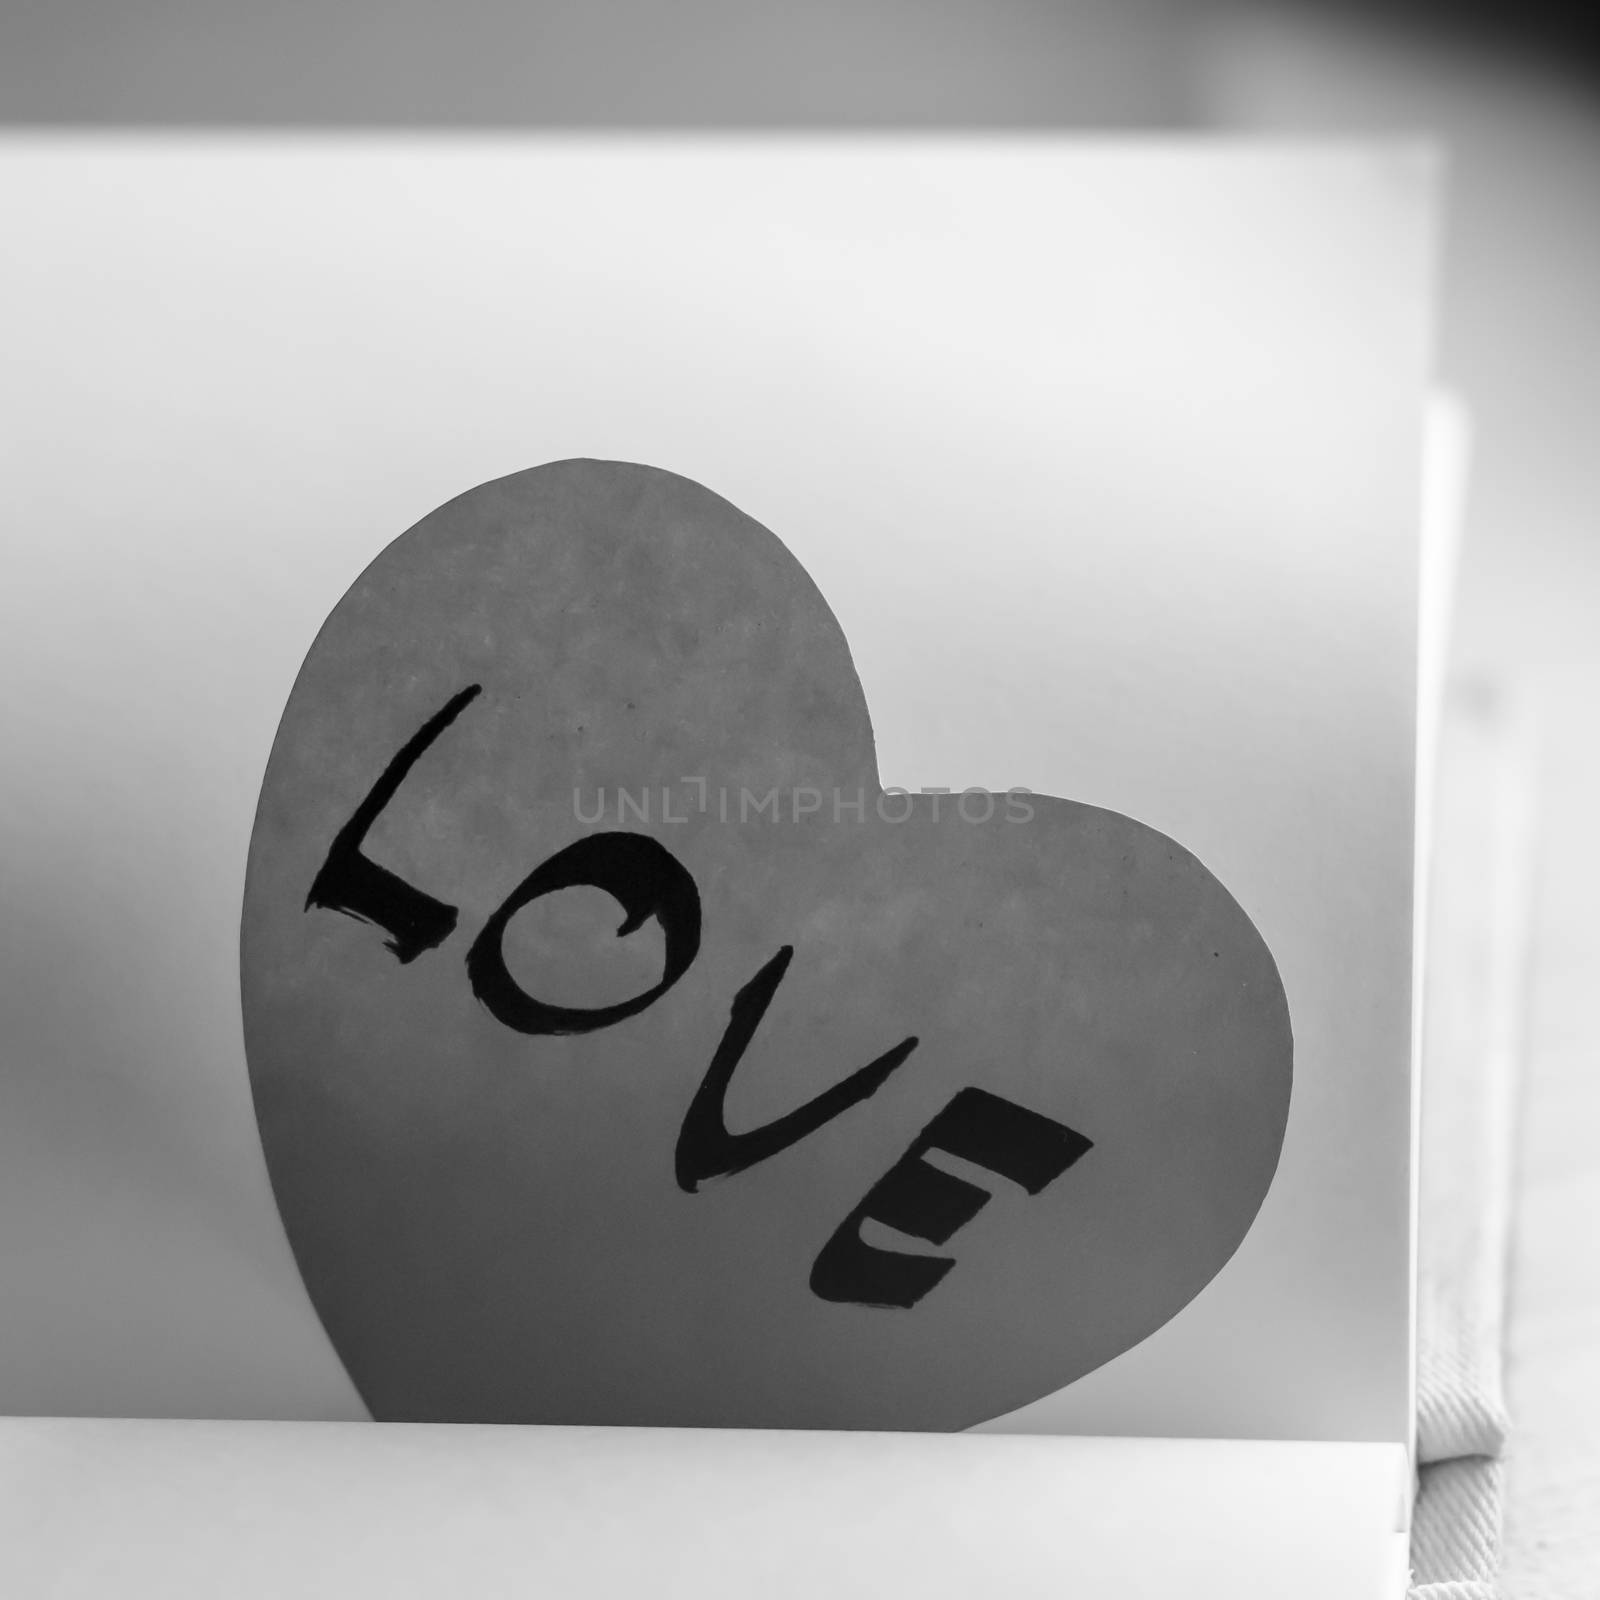 black and white paper heart write love word word